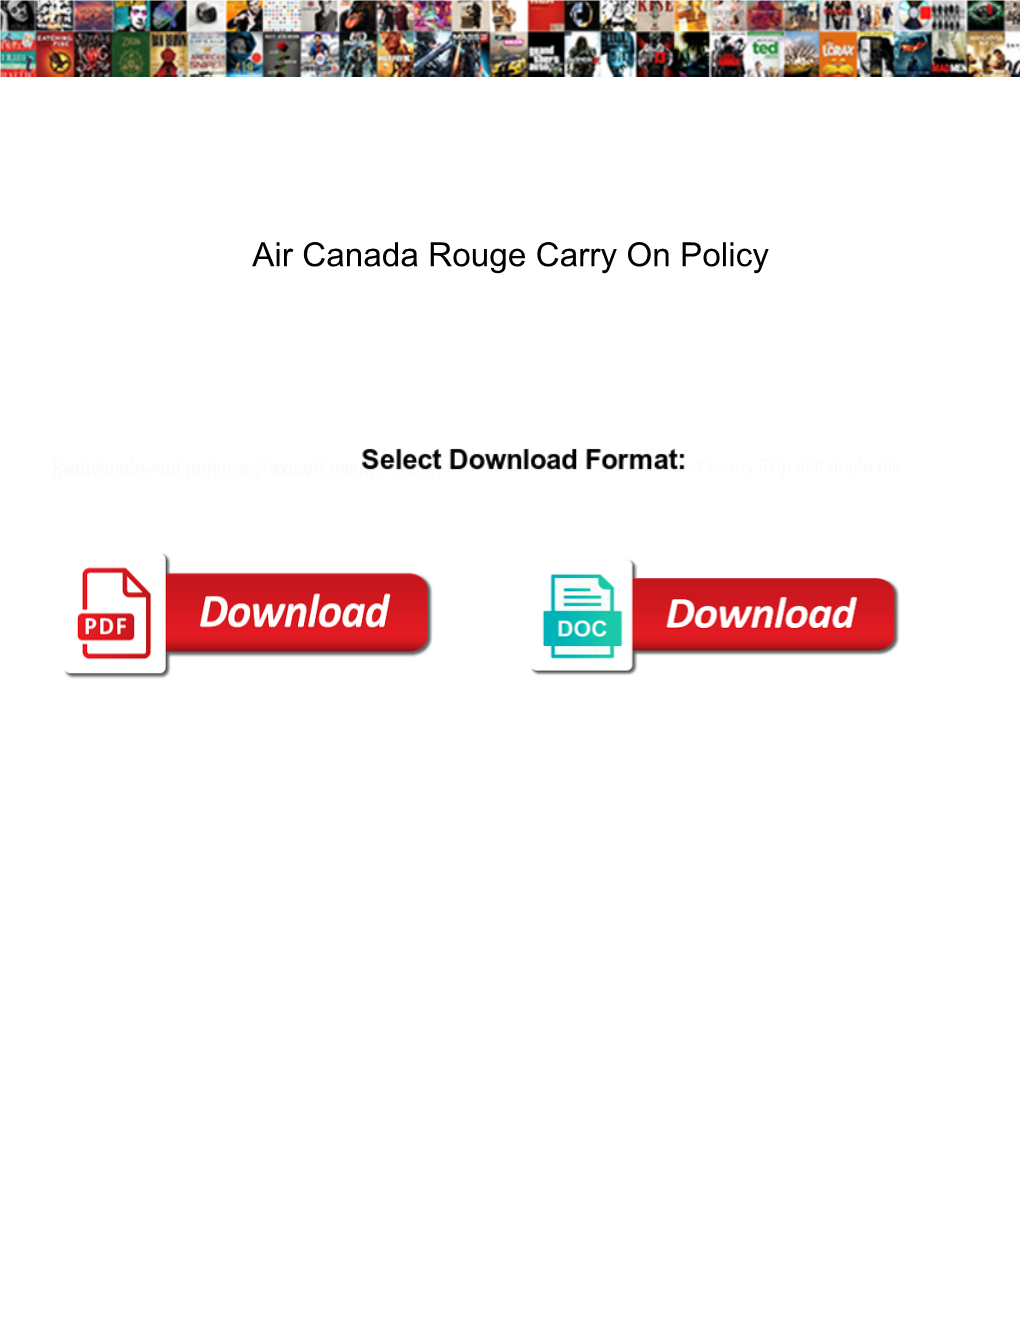 Air Canada Rouge Carry on Policy